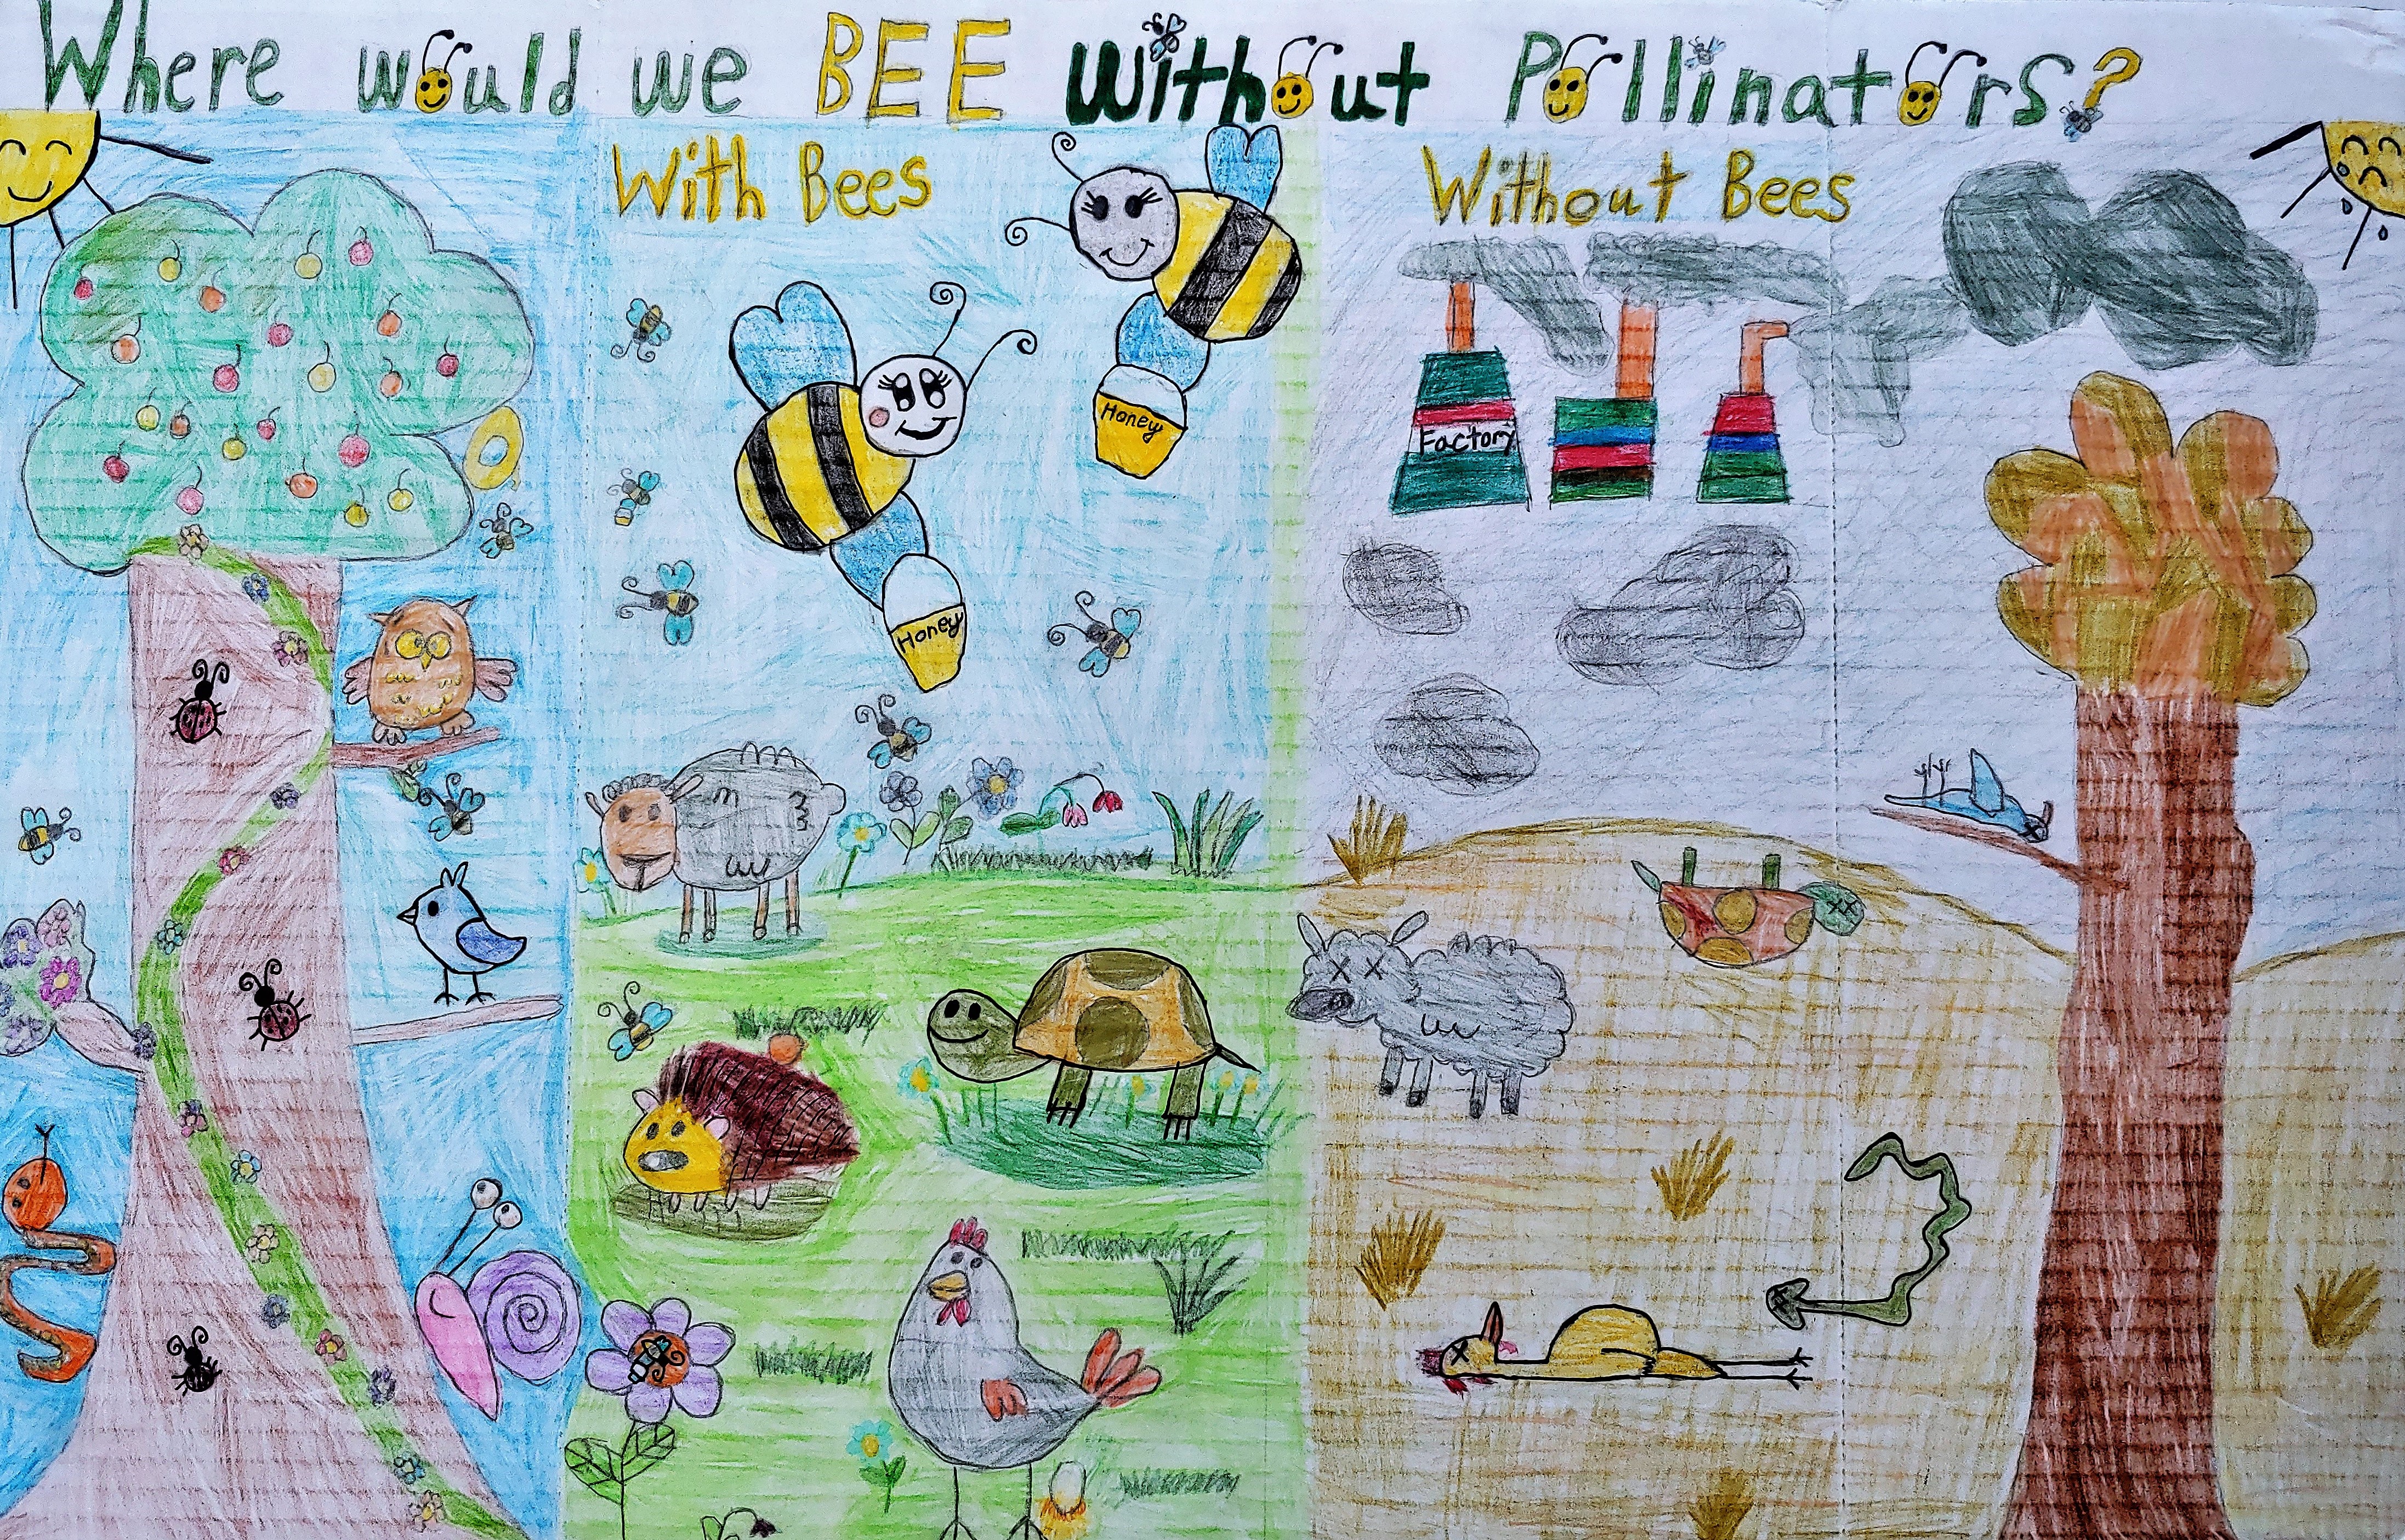 Student Posters Raise Awareness about Pollinator Conservation